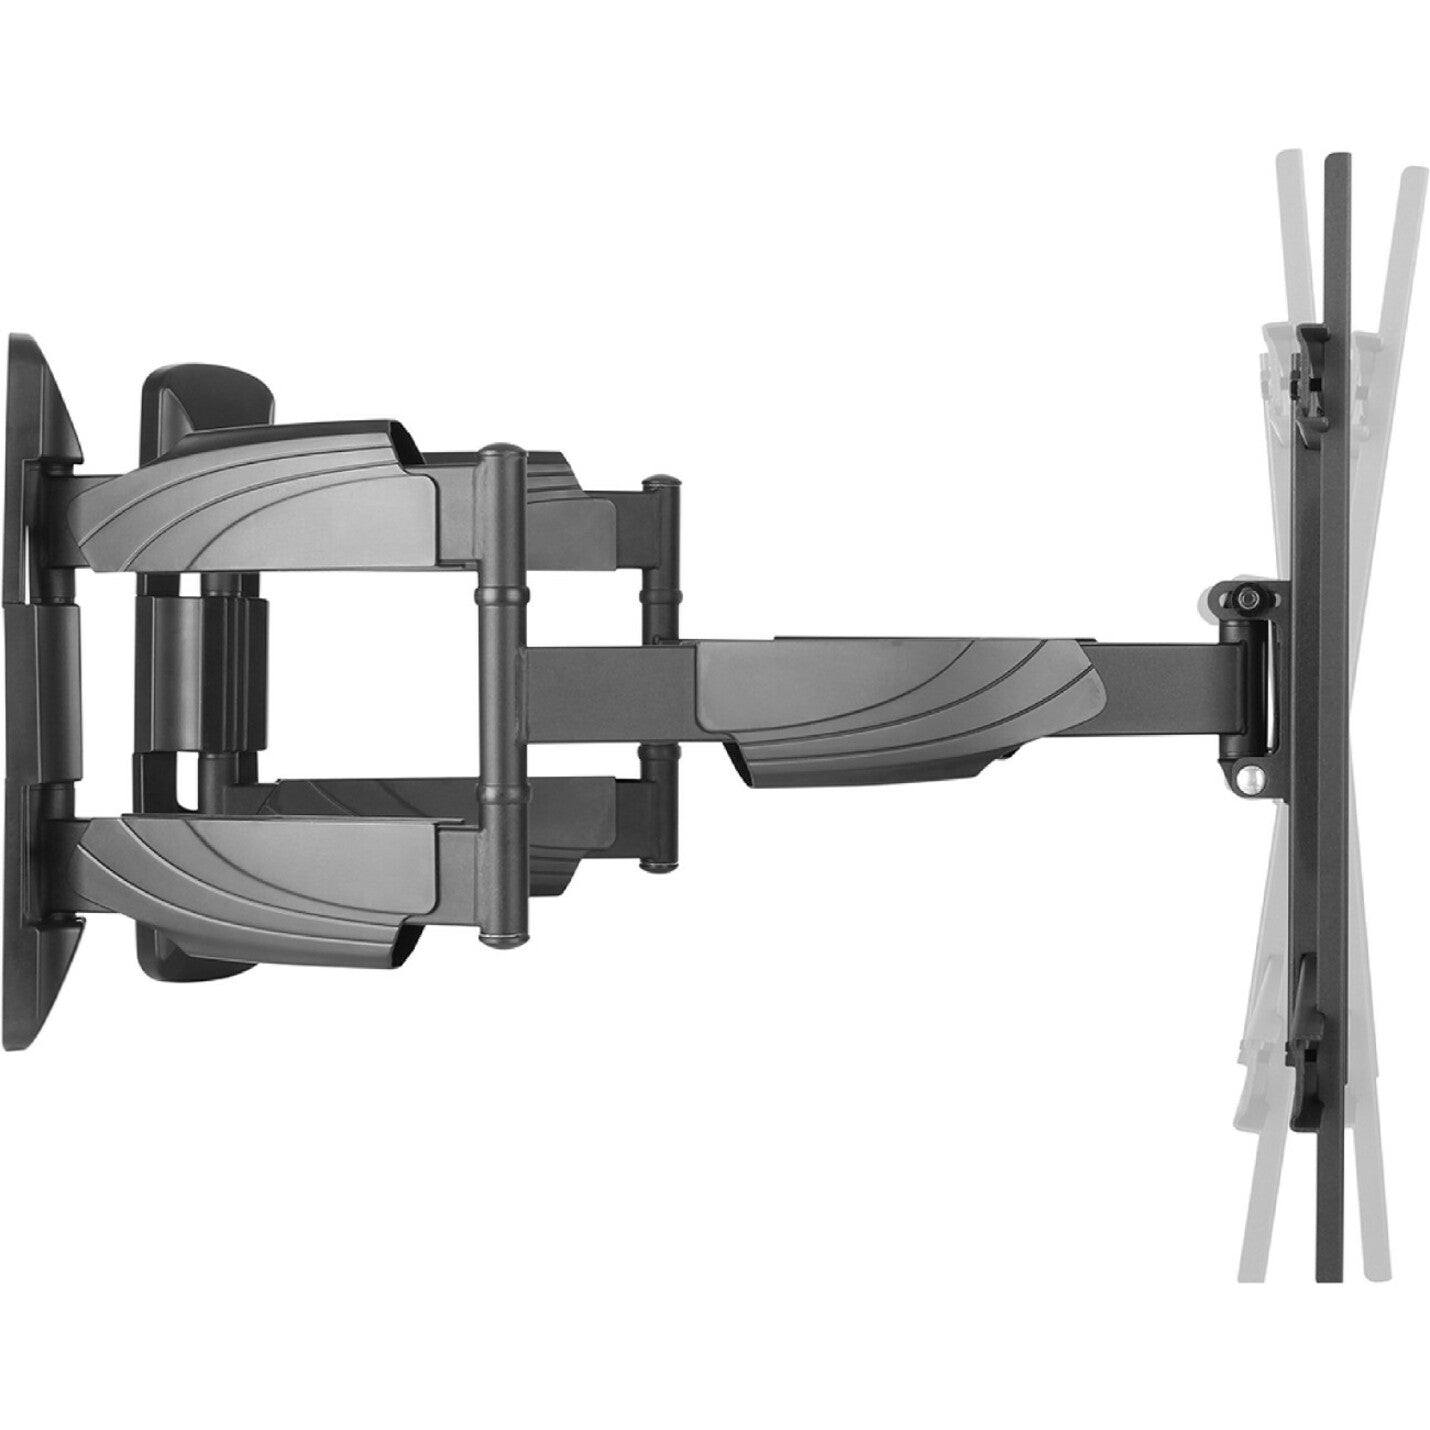 Tripp Lite DMWC3770M Swivel/Tilt Corner Wall Mount for 37" to 70" TVs and Monitors - Flat/Curved, 5 Year Warranty